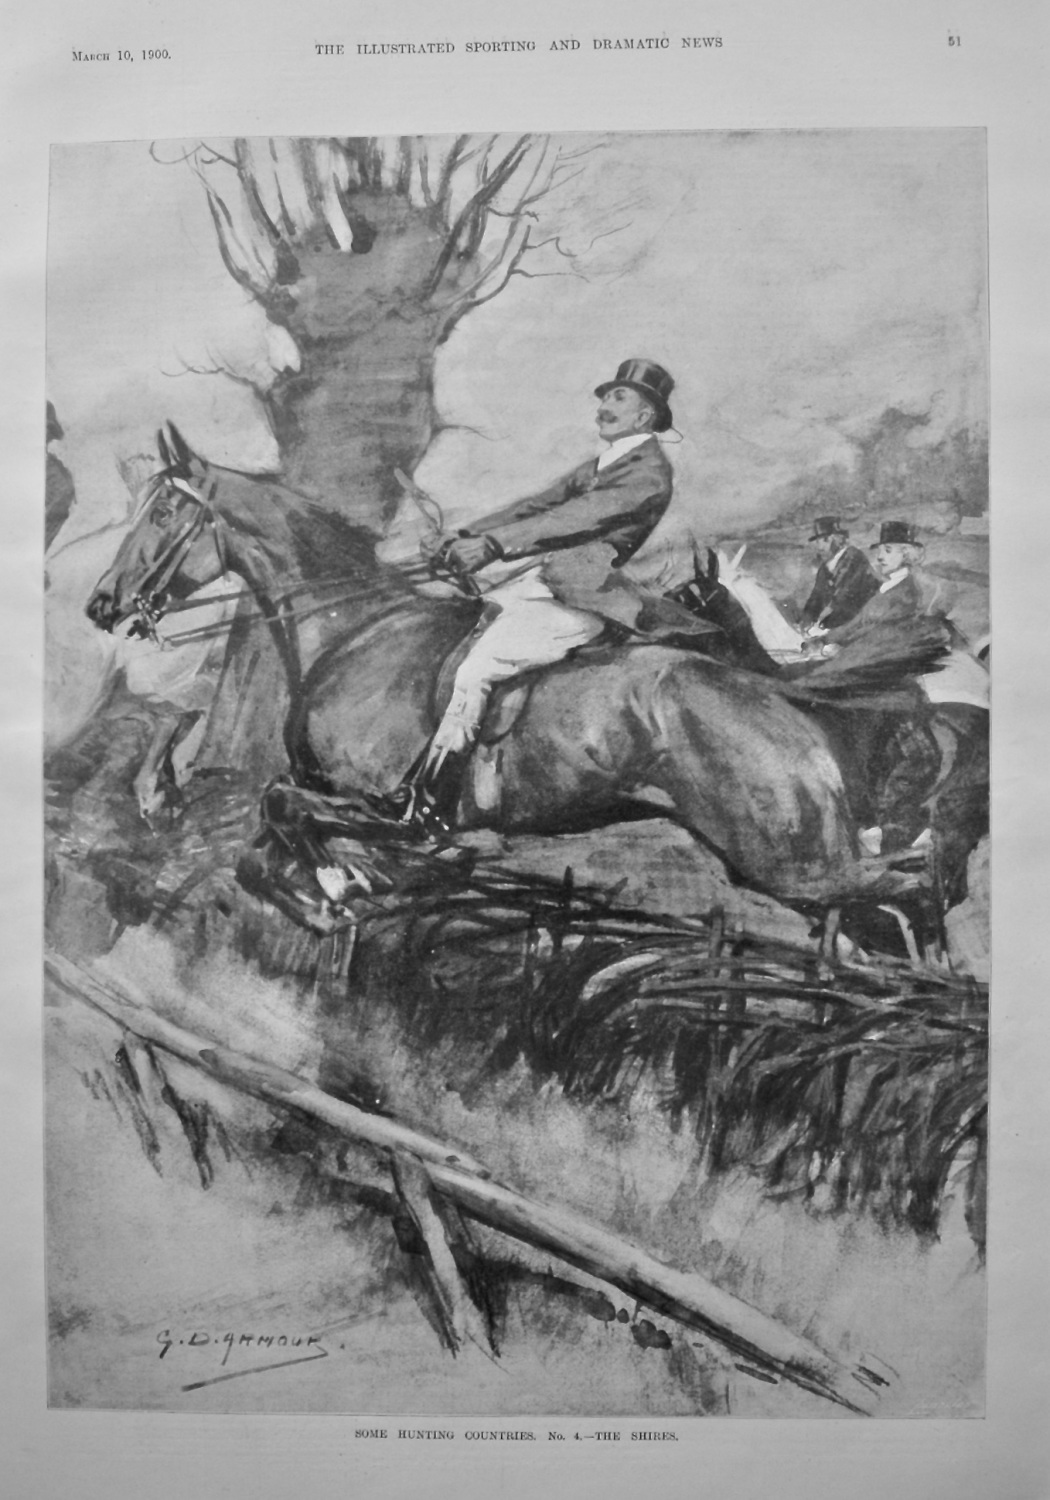 Some Hunting Countries. No. 4. - The Shires. 1900.